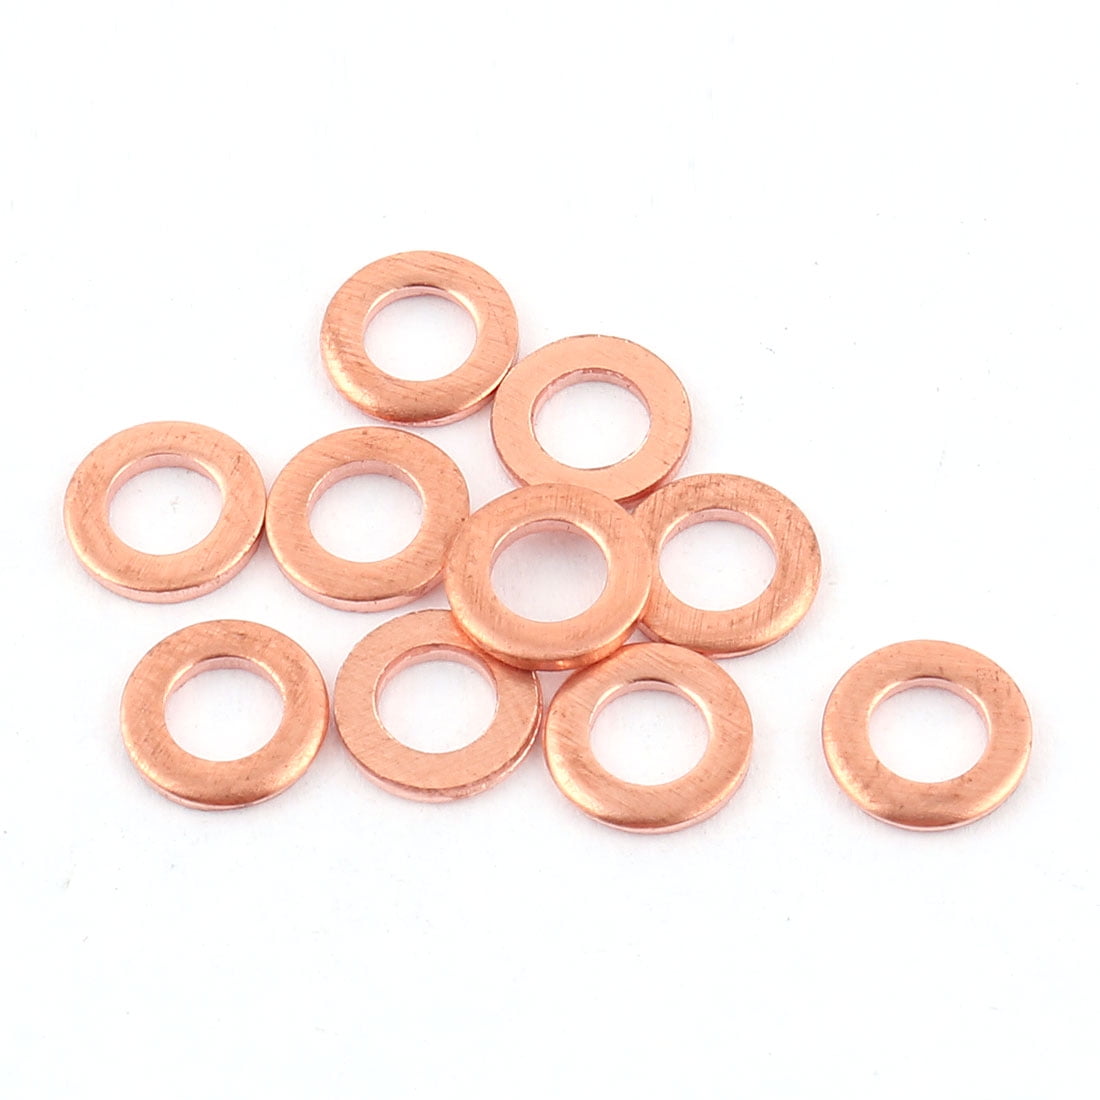 M5-M48 Brass Flat Washer Copper sealing washers Gasket Seal Ring TH:1MM-1.5-2MM 